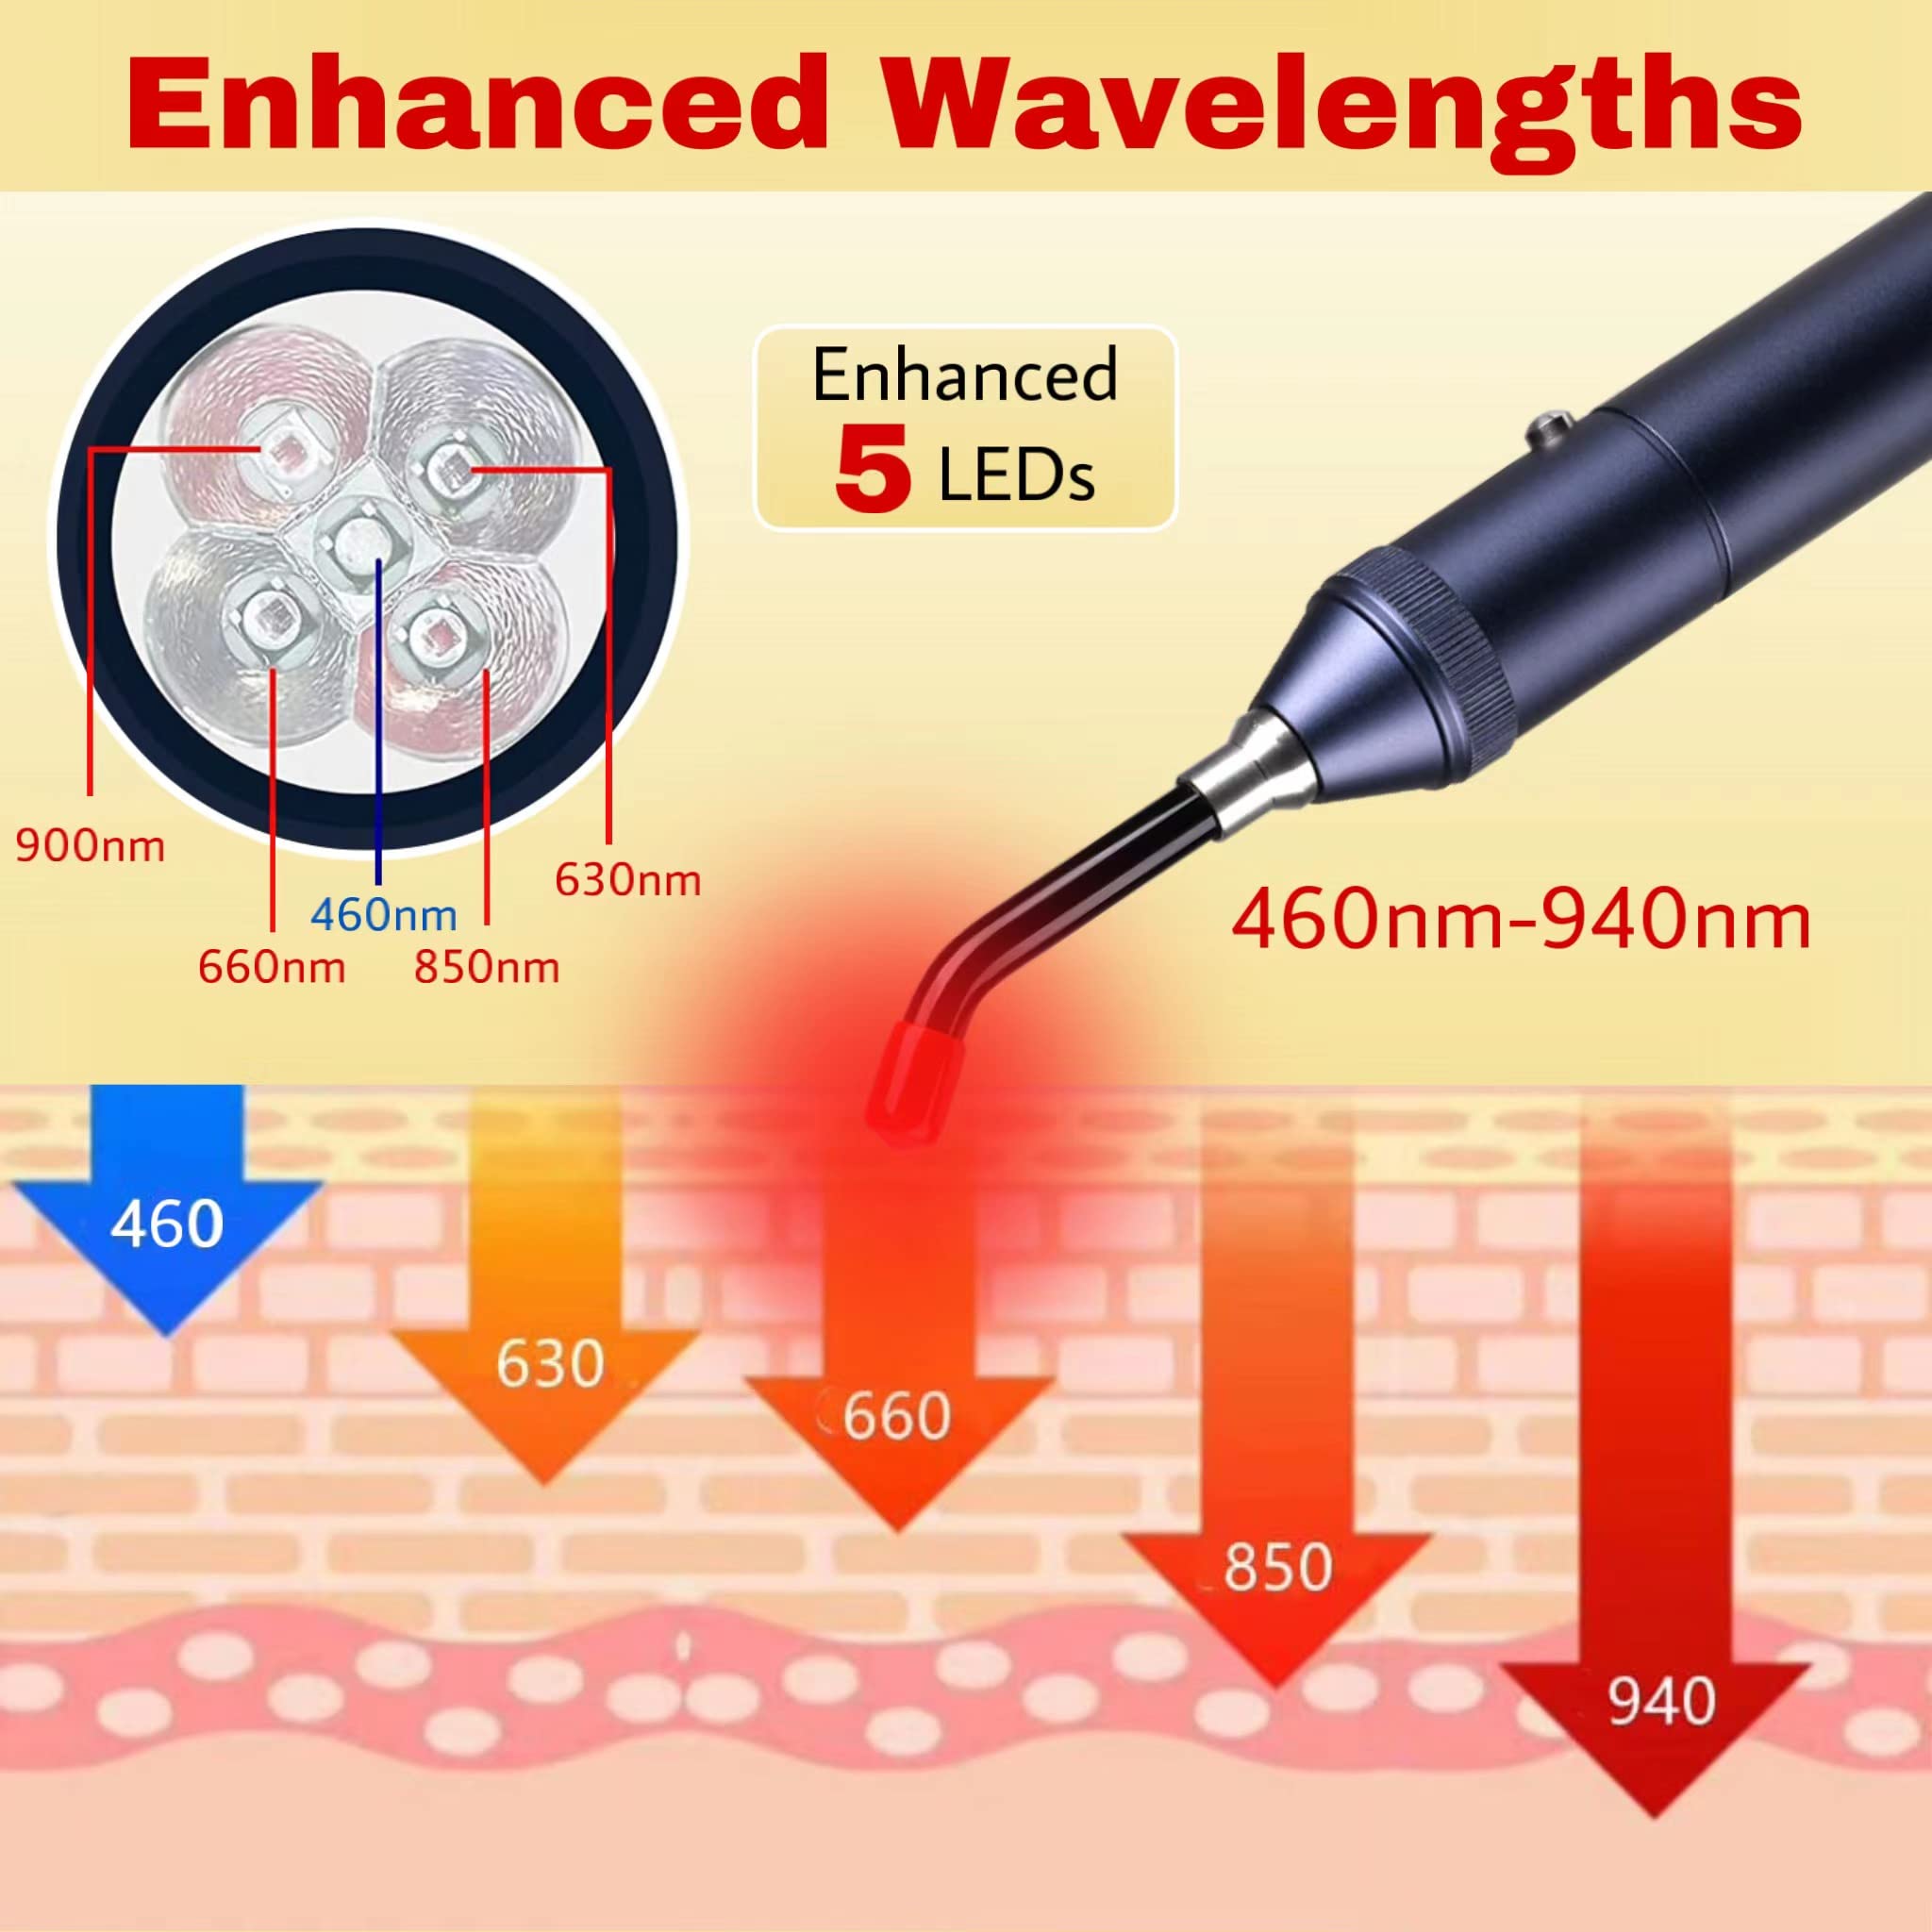 3-in-1 Red Light Therapy，Infrared Light Device,Handheld LED Light Device,Cold Sore Canker Sore,Upgraded to 5 LEDs,with 940nm 660nm for Pain Relief on Body, Knee, Ankle, Dogs